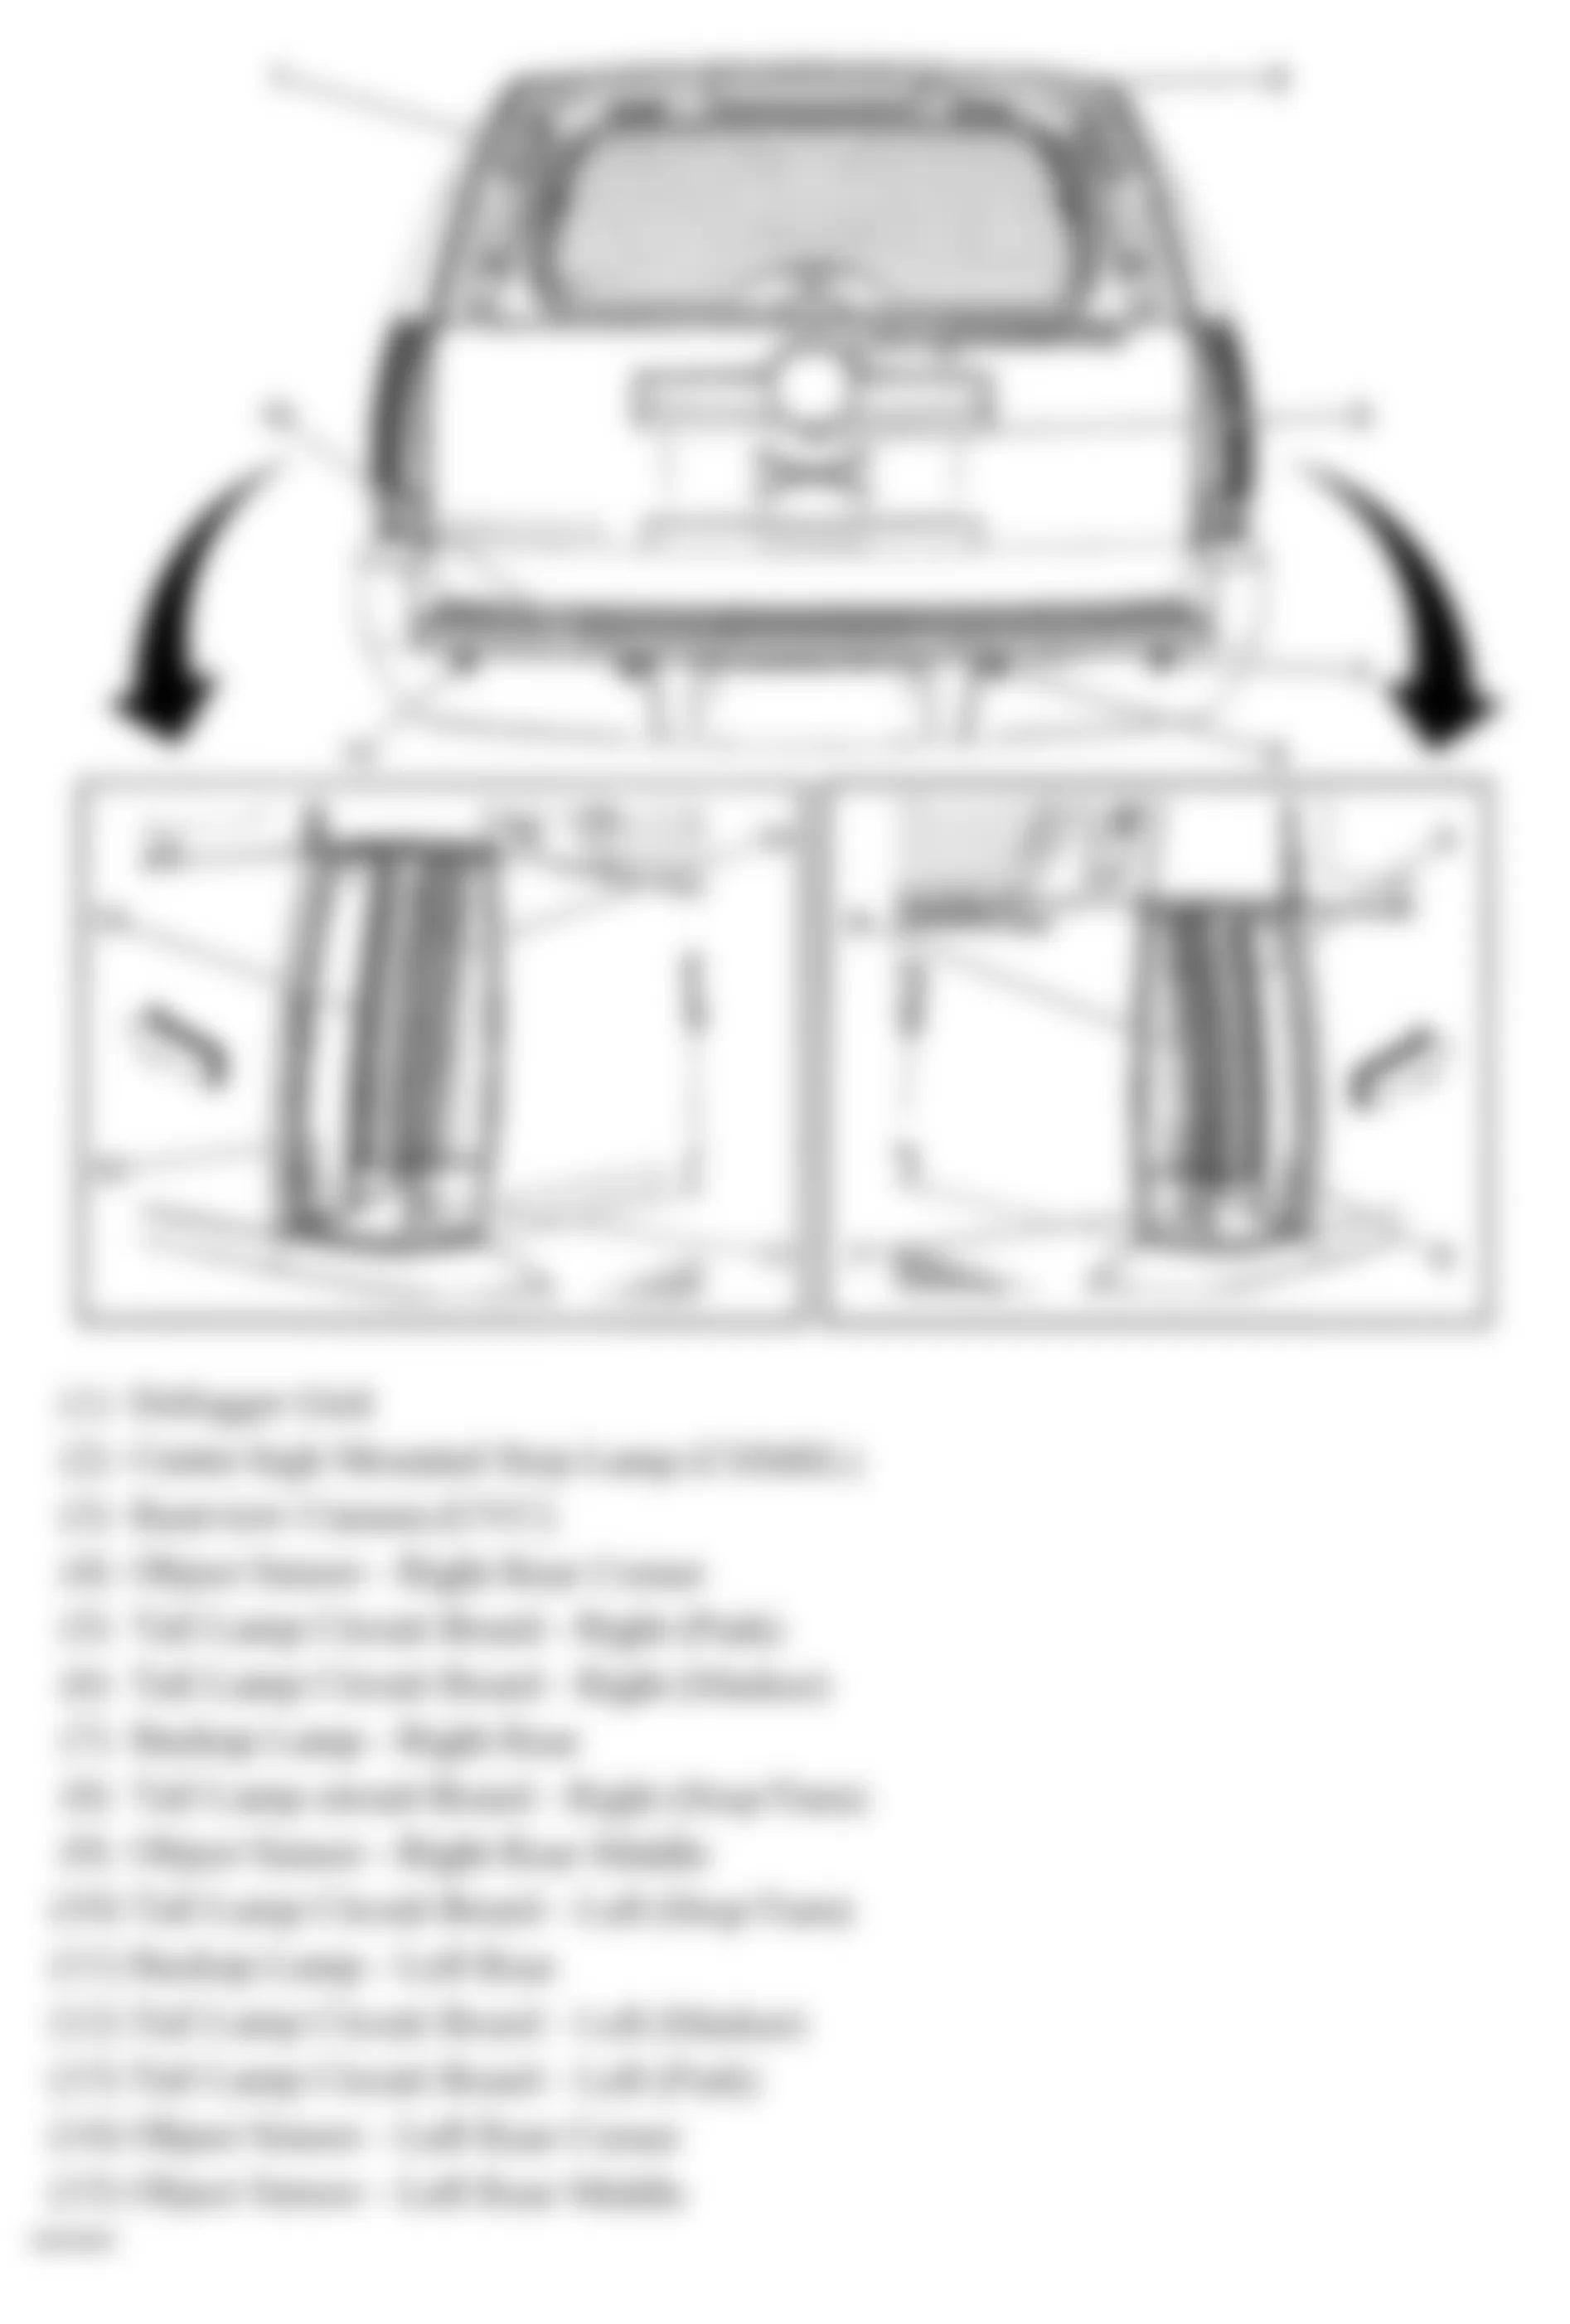 GMC Yukon Denali 2008 - Component Locations -  Rear Of Vehicle (Tahoe & Escalade W/One Piece Liftgate)